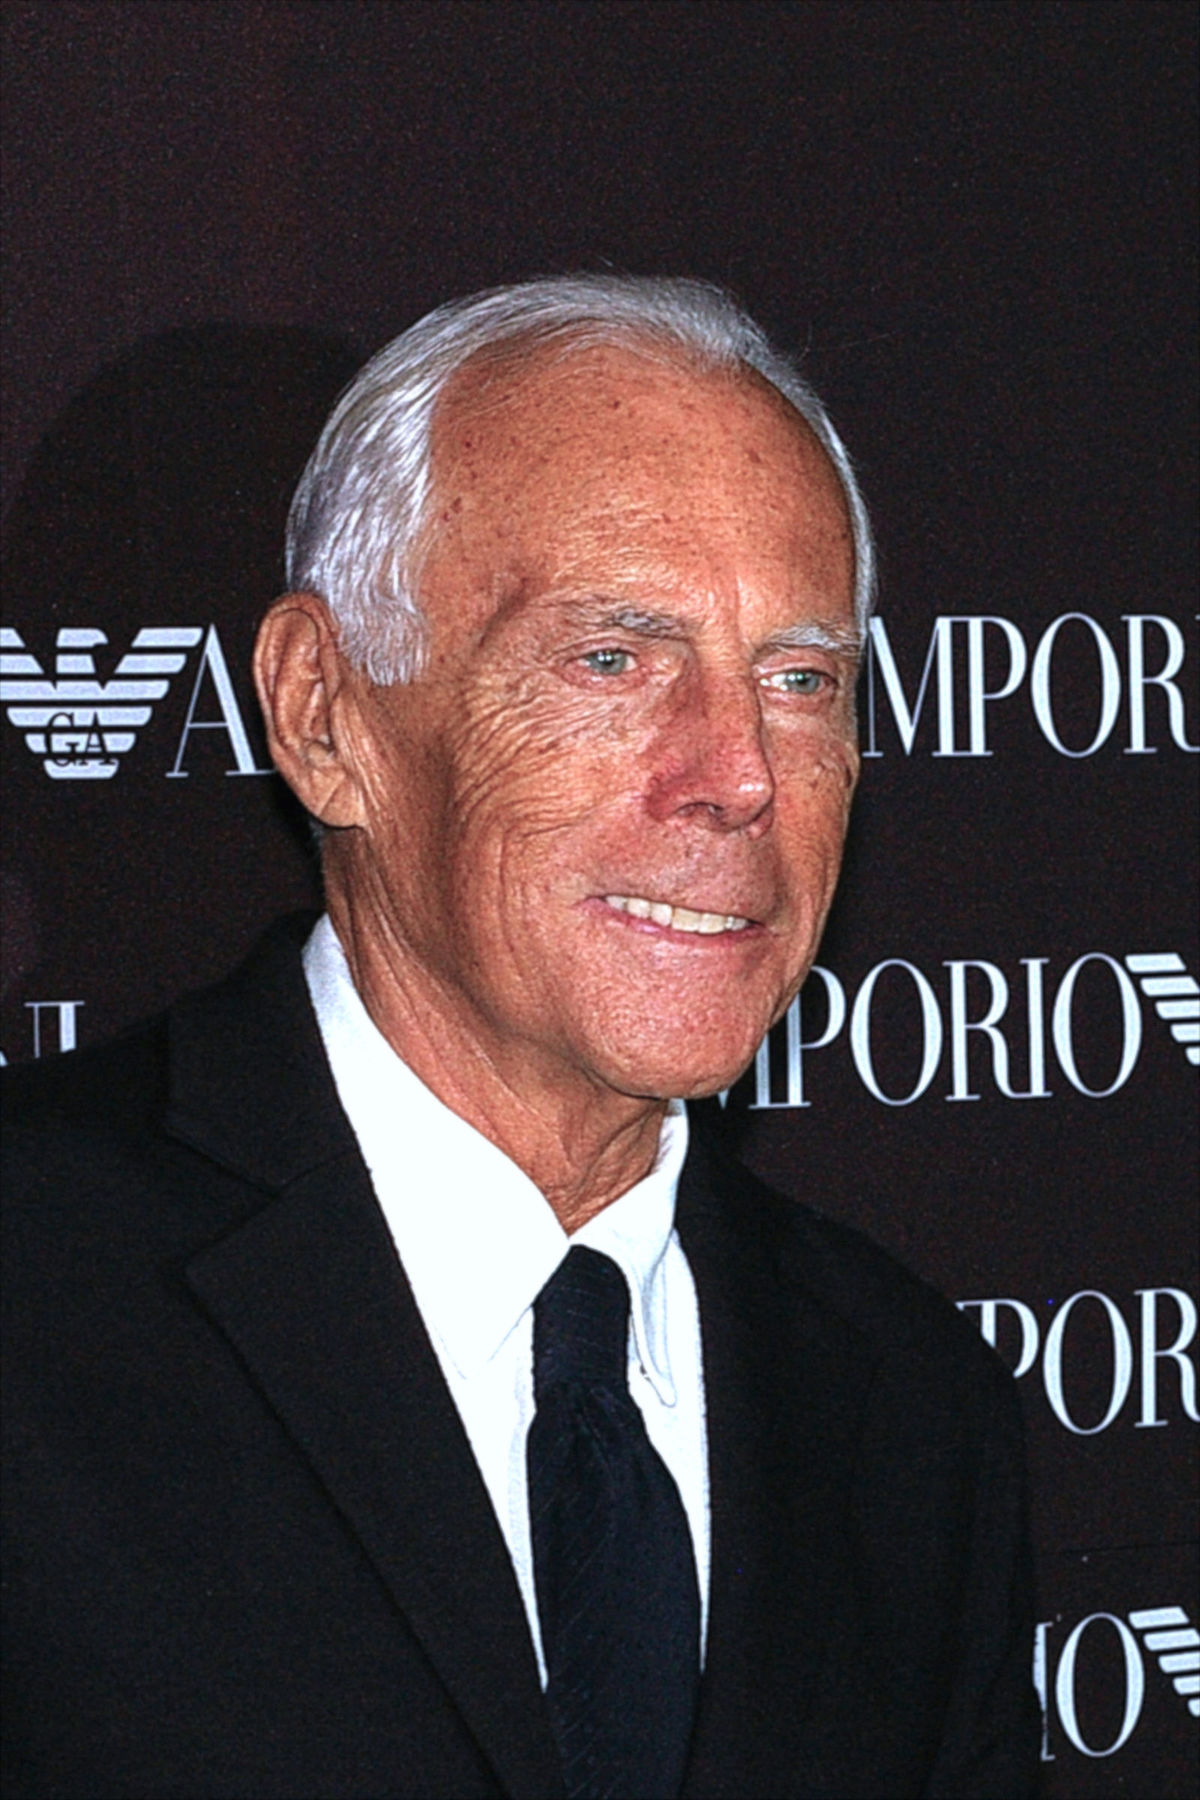 Giorgio Armani - The difference between style and fashion...